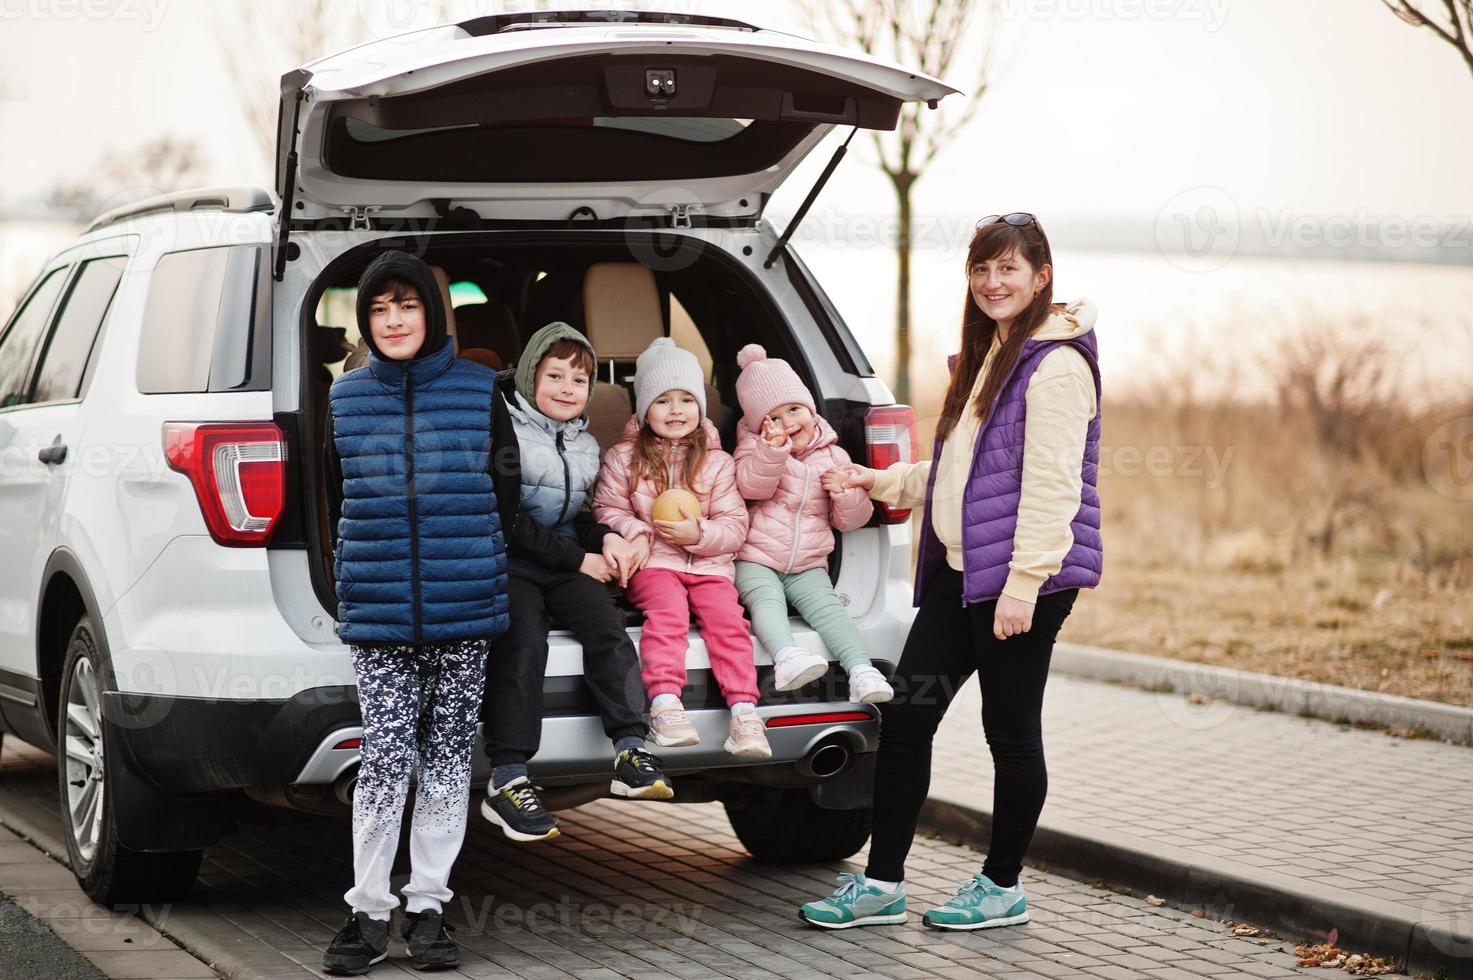 Mother with four kids sitting in trunk of big suv car. photo